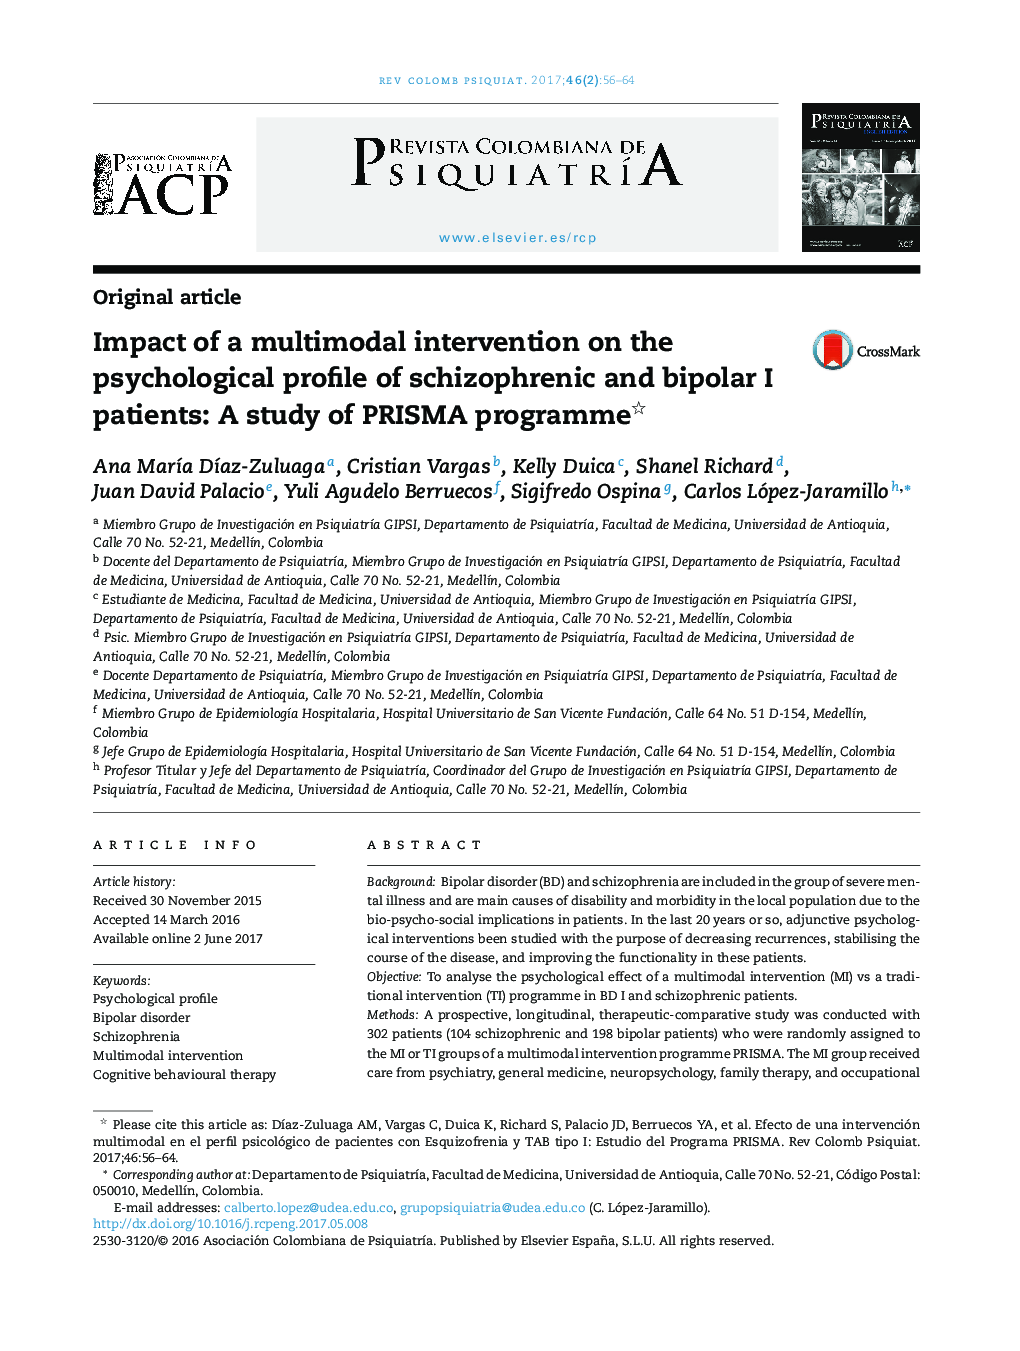 Impact of a multimodal intervention on the psychological profile of schizophrenic and bipolar I patients: A study of PRISMA programme